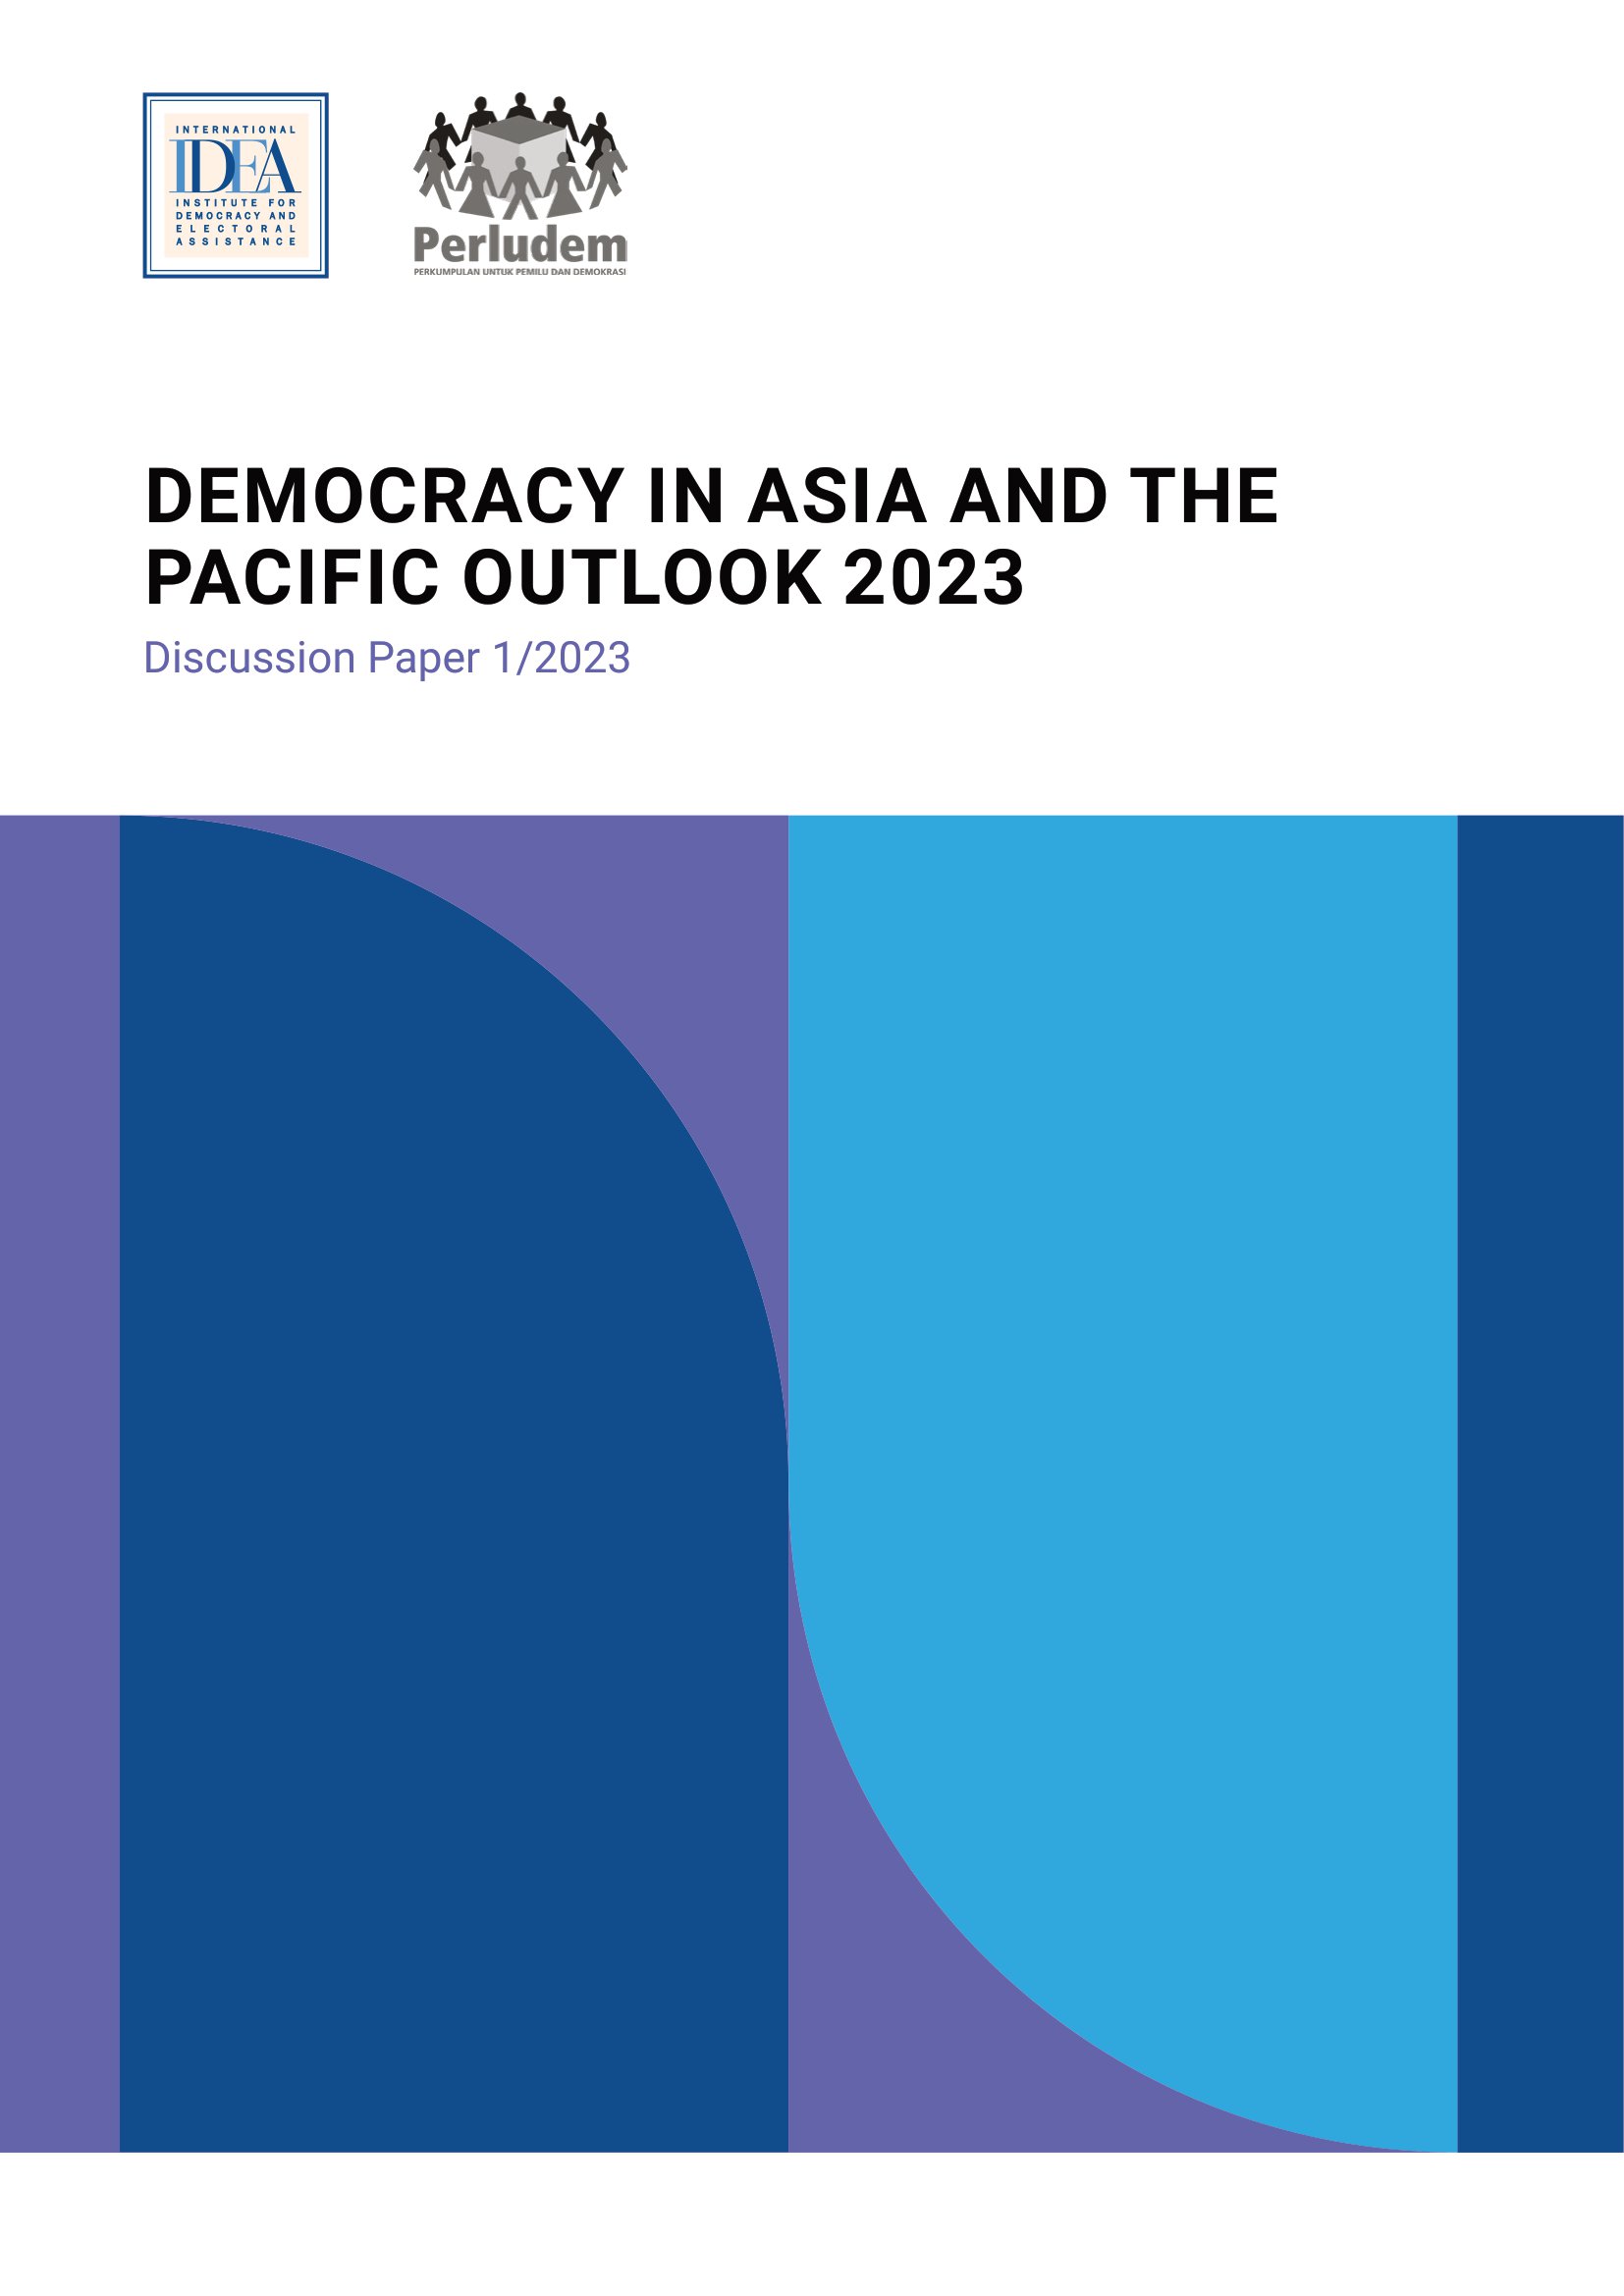 Democracy in Asia Pacific